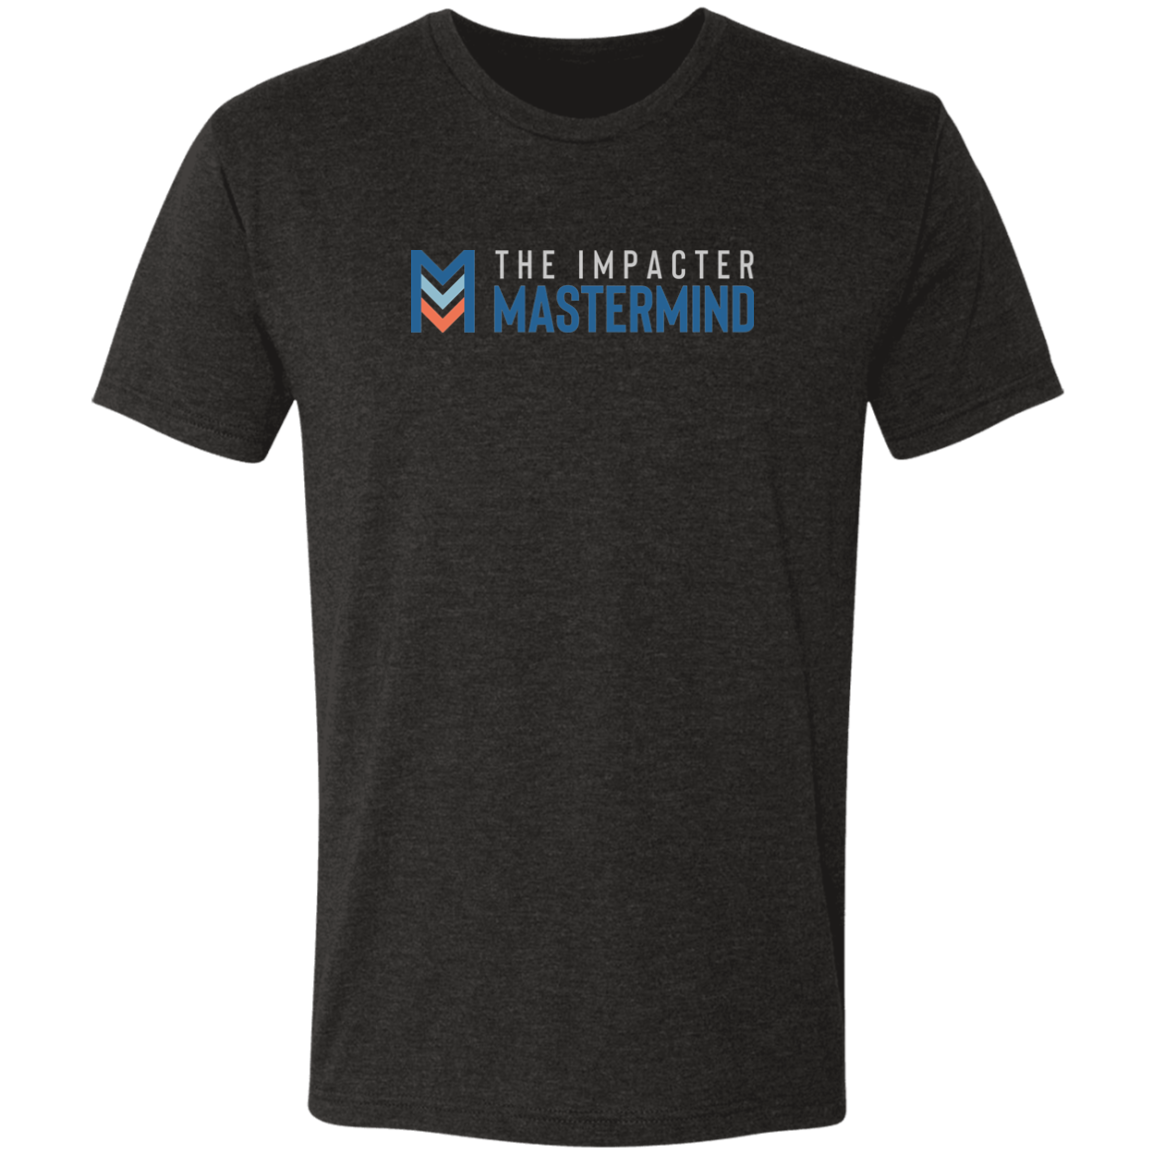 The Impacter Mastermind - Triblend T-Shirt